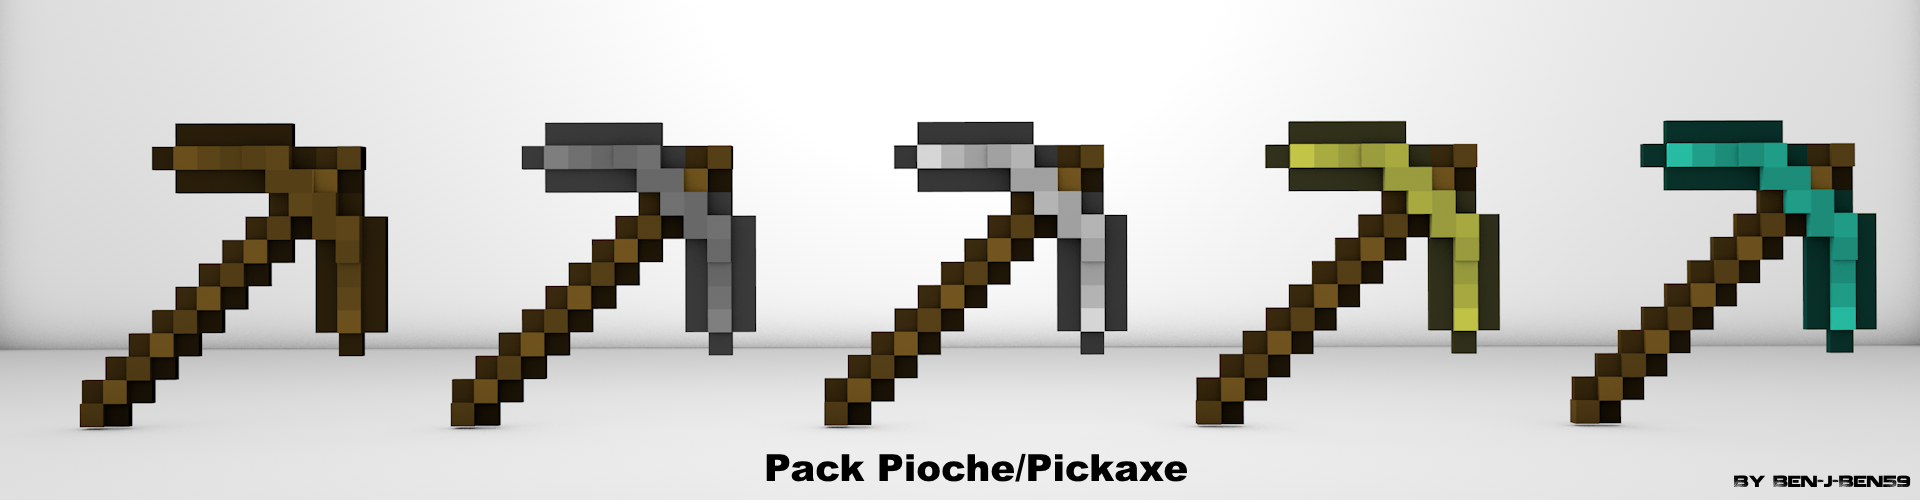 pack_pioche-png.65191